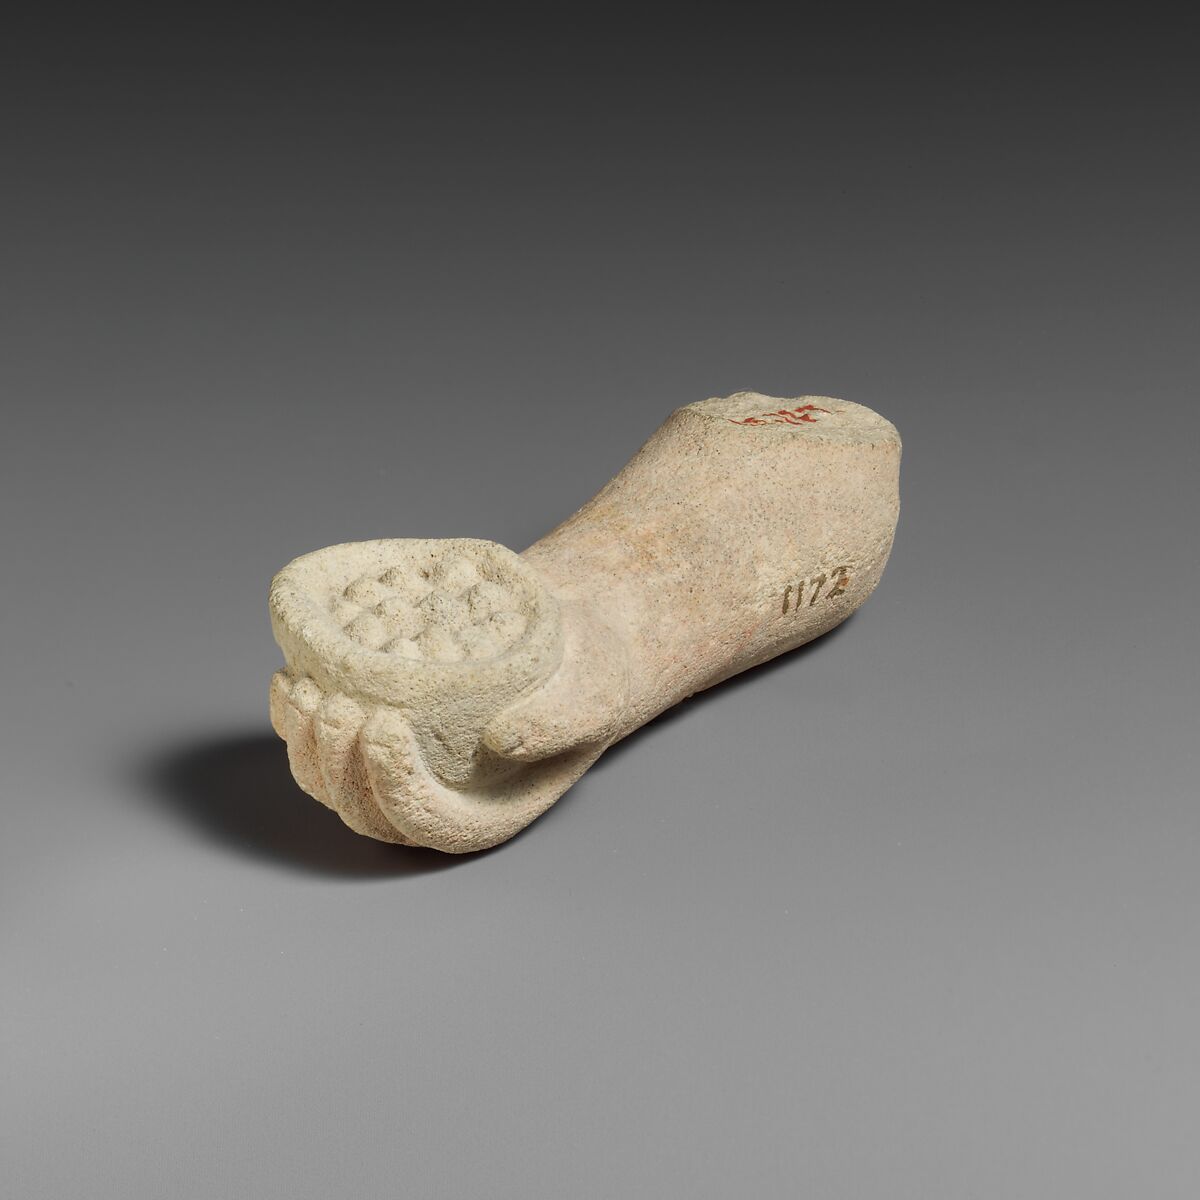 Limestone arm with pieces of fruit (?) held in the hand, Limestone, Cypriot 